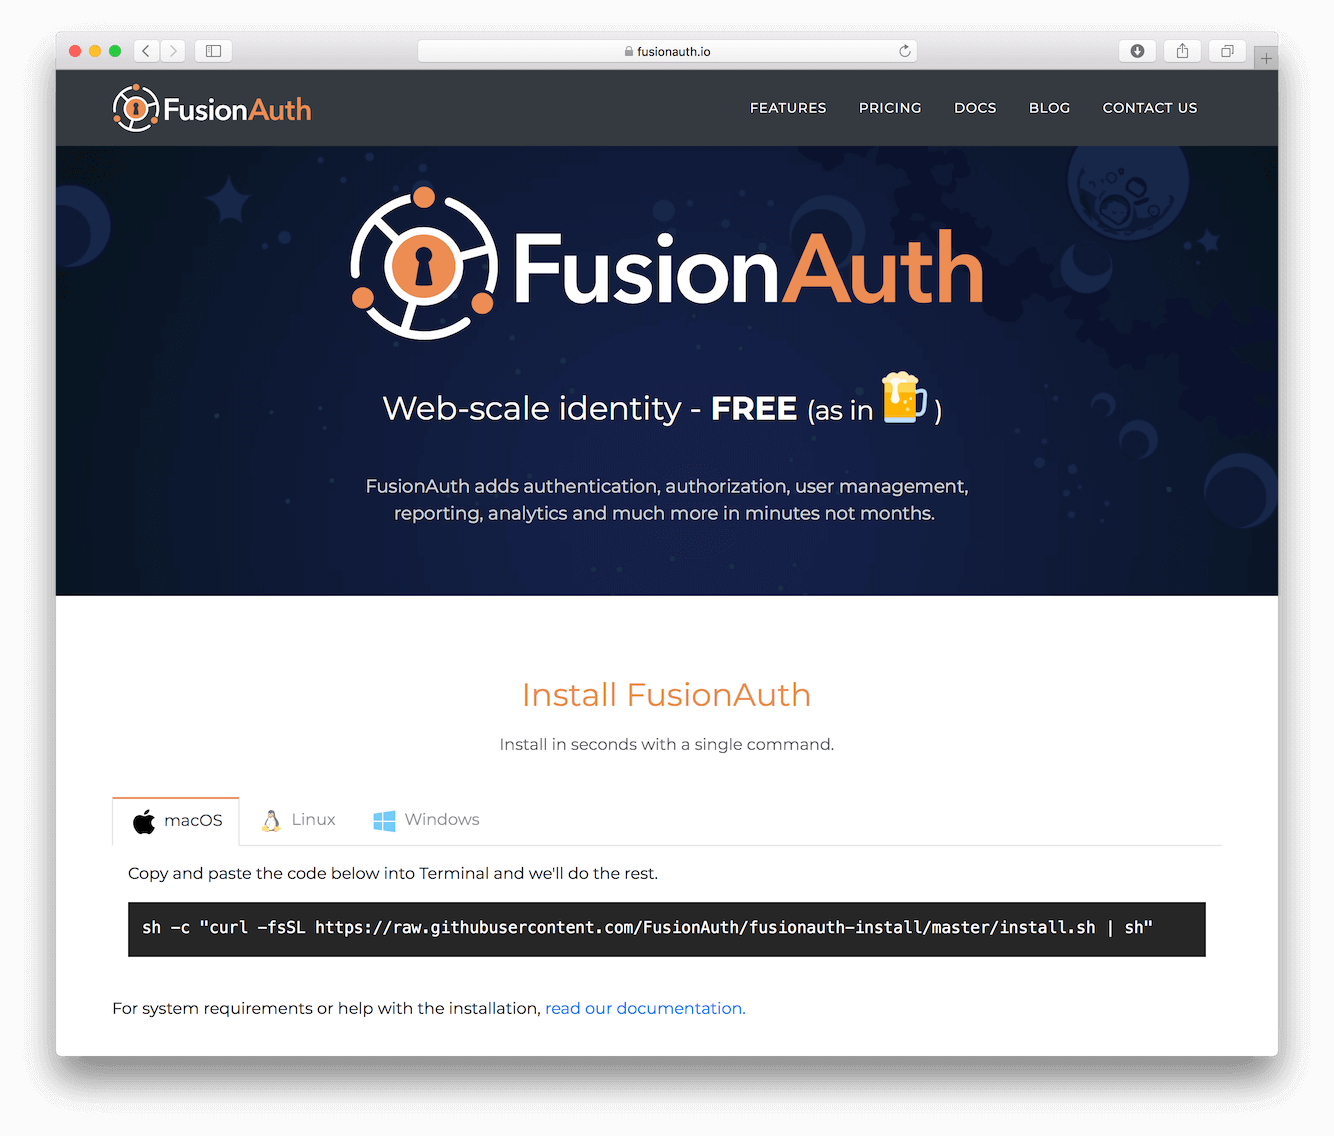 The FusionAuth website - How we do it